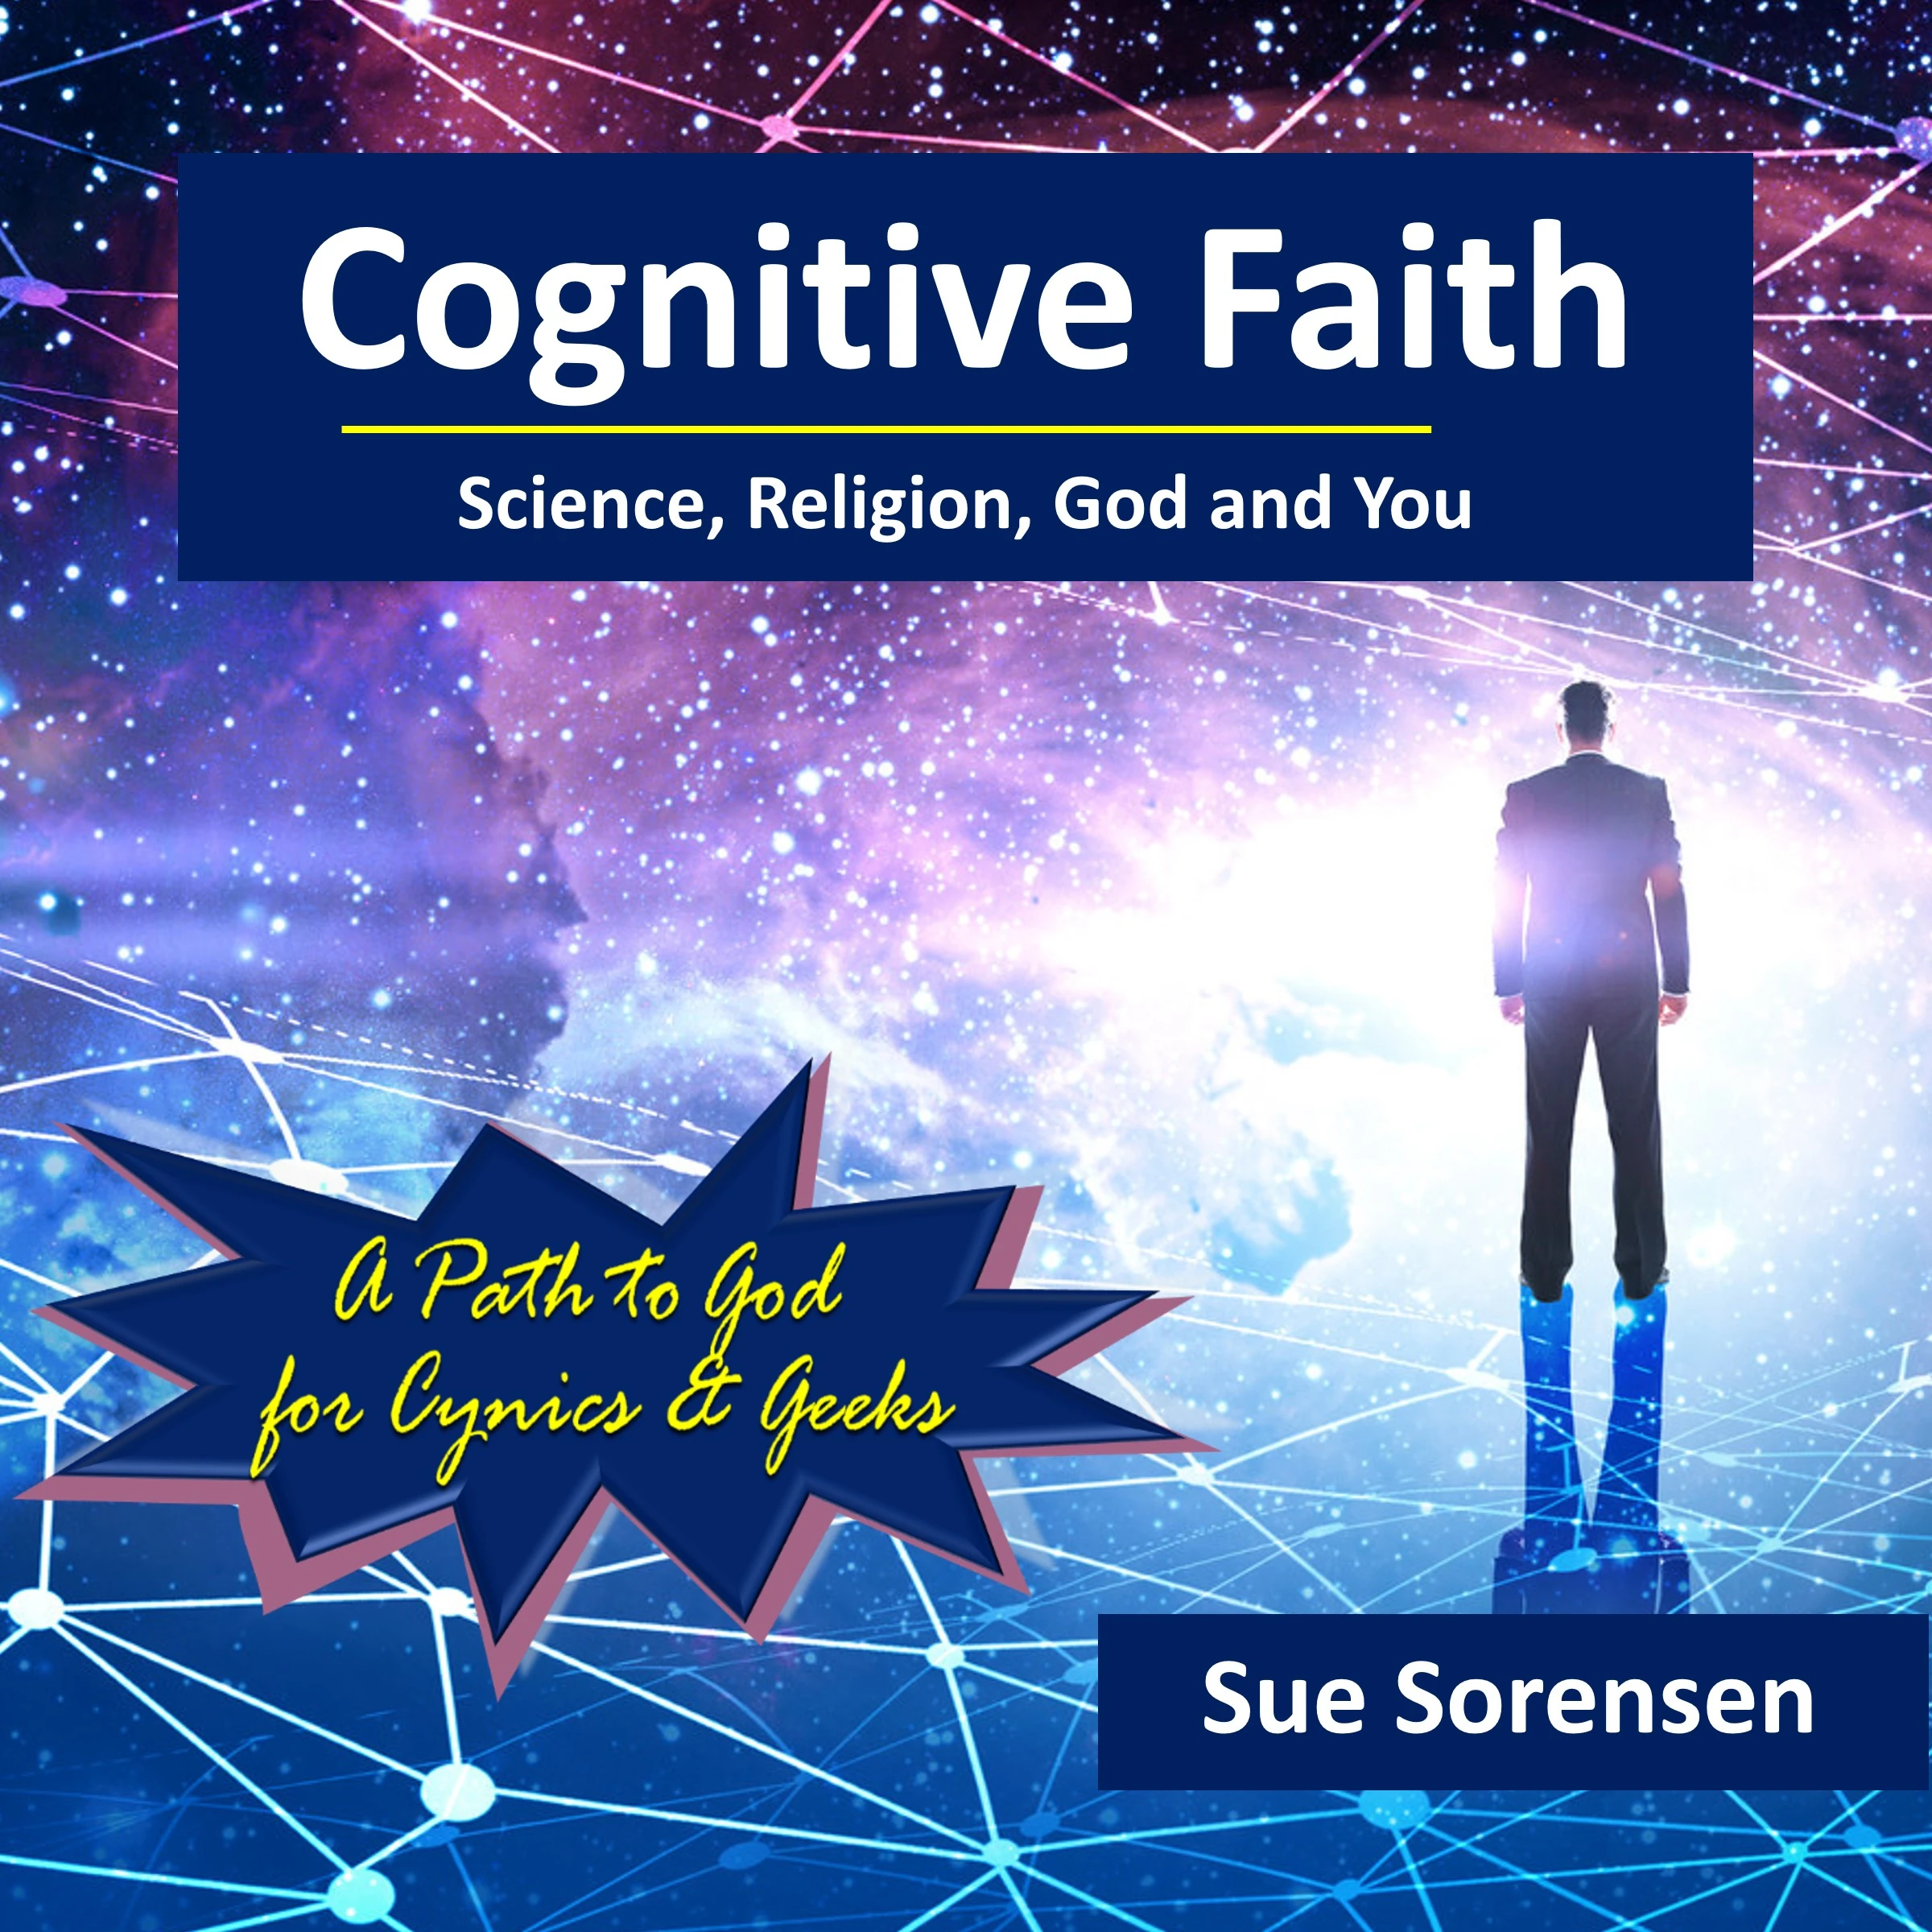 Cognitive Faith: Science, Religion, God and You Audiobook by Sue Sorensen